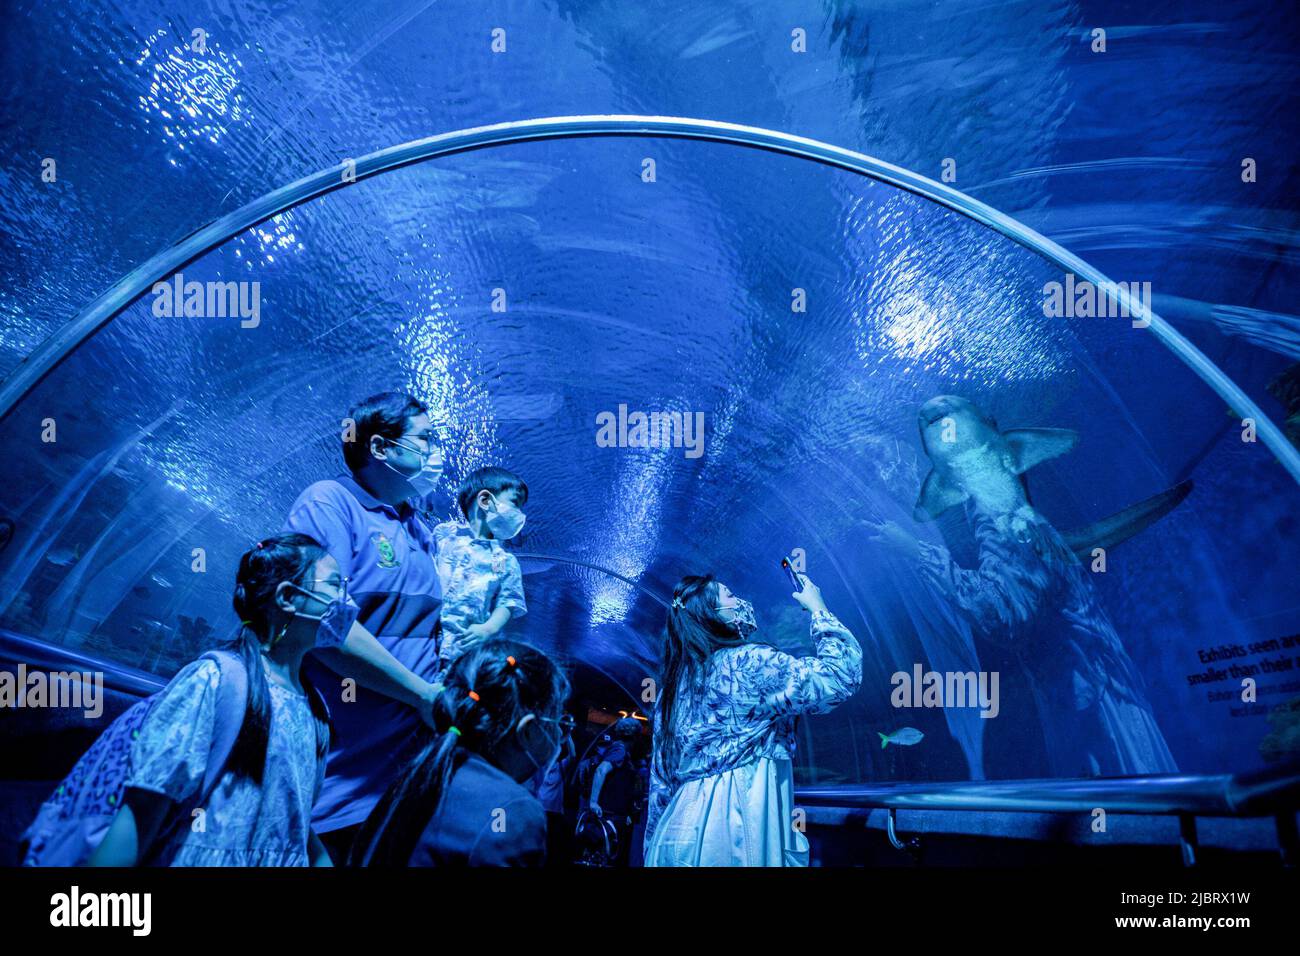 Kuala Lumpur, Malaysia. 08th June, 2022. Visitors to Aquaria KLCC enjoy the marine life on display in the main aquarium tunnel of Aquaria KLCC on the occasion of World Ocean Day in Kuala Lumpur. Credit: SOPA Images Limited/Alamy Live News Stock Photo